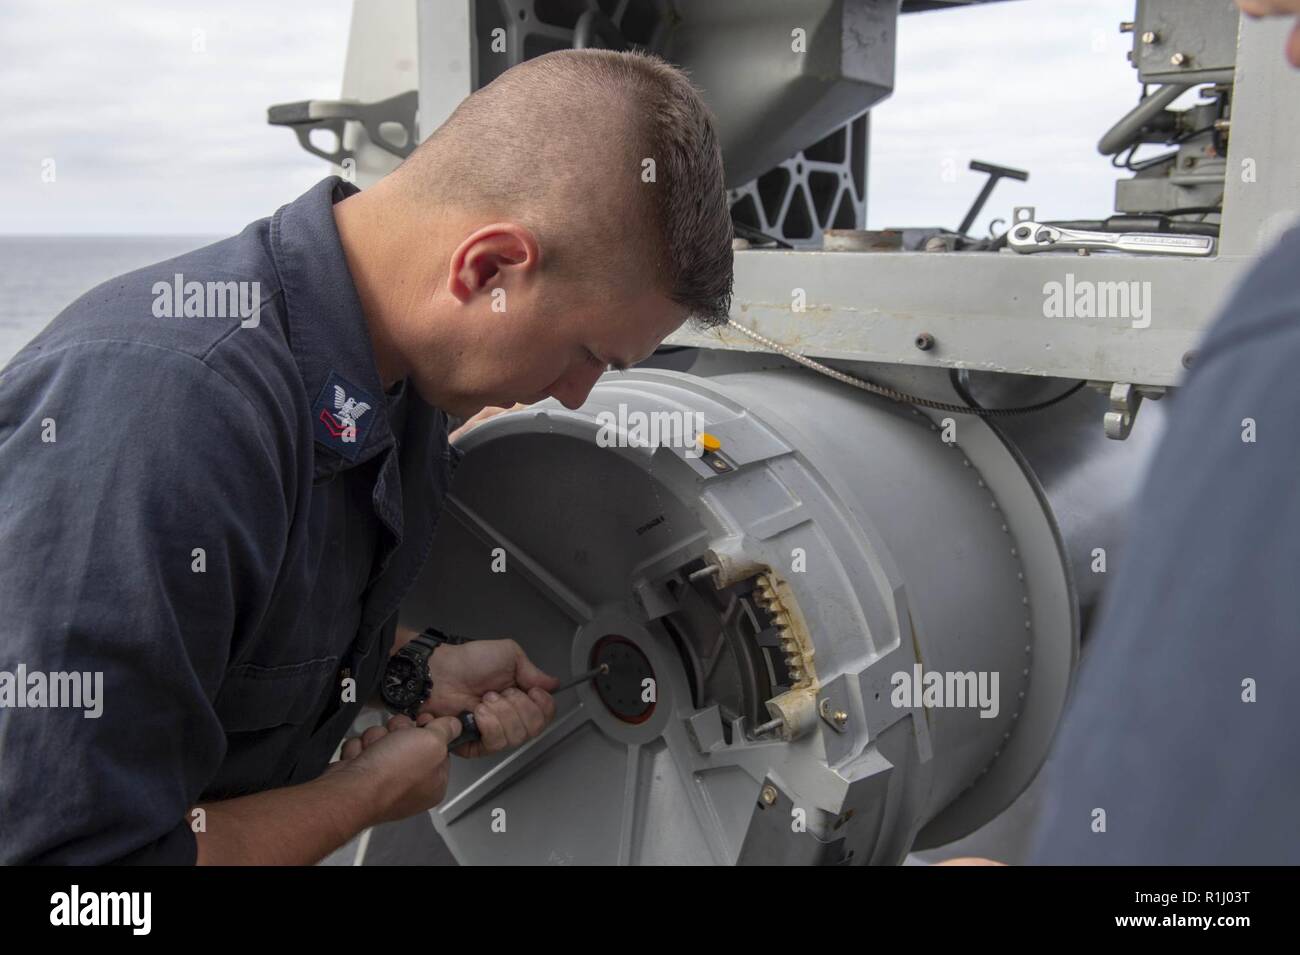 PACIFIC OCEAN (Sept. 23, 2018) Fire Controlman 2nd Class Benjamin Pruitt, from Dawsonville, Ga., removes a drum casing while performing maintenance on the aft close-in weapons system (CIWS) aboard the amphibious assault ship USS Bonhomme Richard (LHD 6). Bonhomme Richard is operating in the 3rd Fleet area of operations. Stock Photo